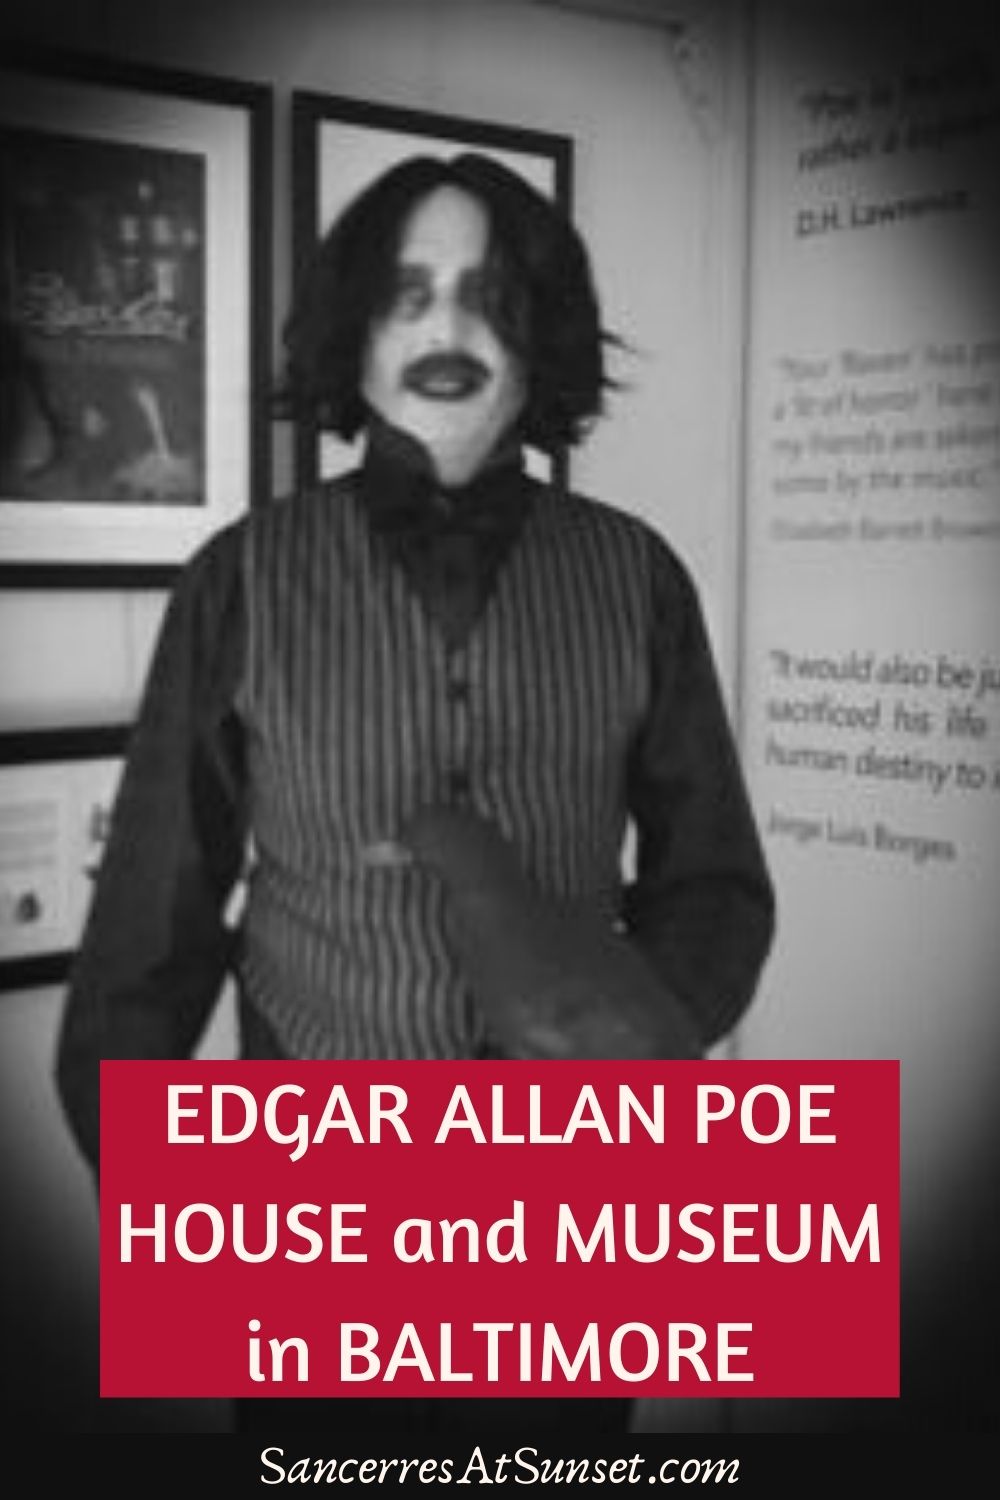 Edgar Allan Poe House and Museum in Baltimore, Maryland